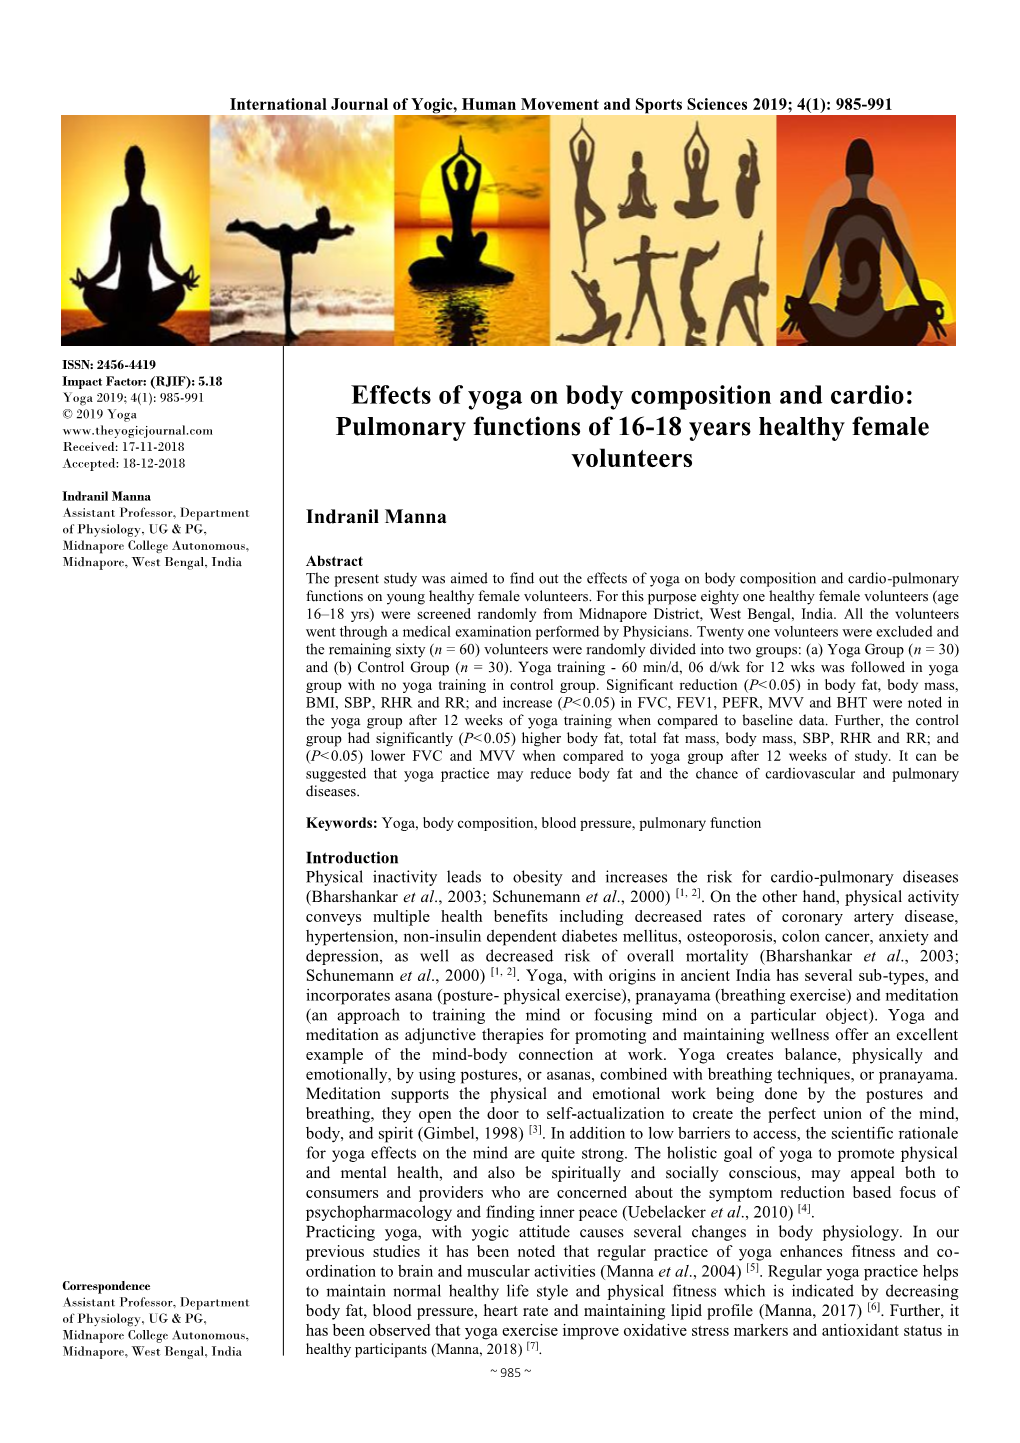 Effects of Yoga on Body Composition and Cardio: Pulmonary Functions Of